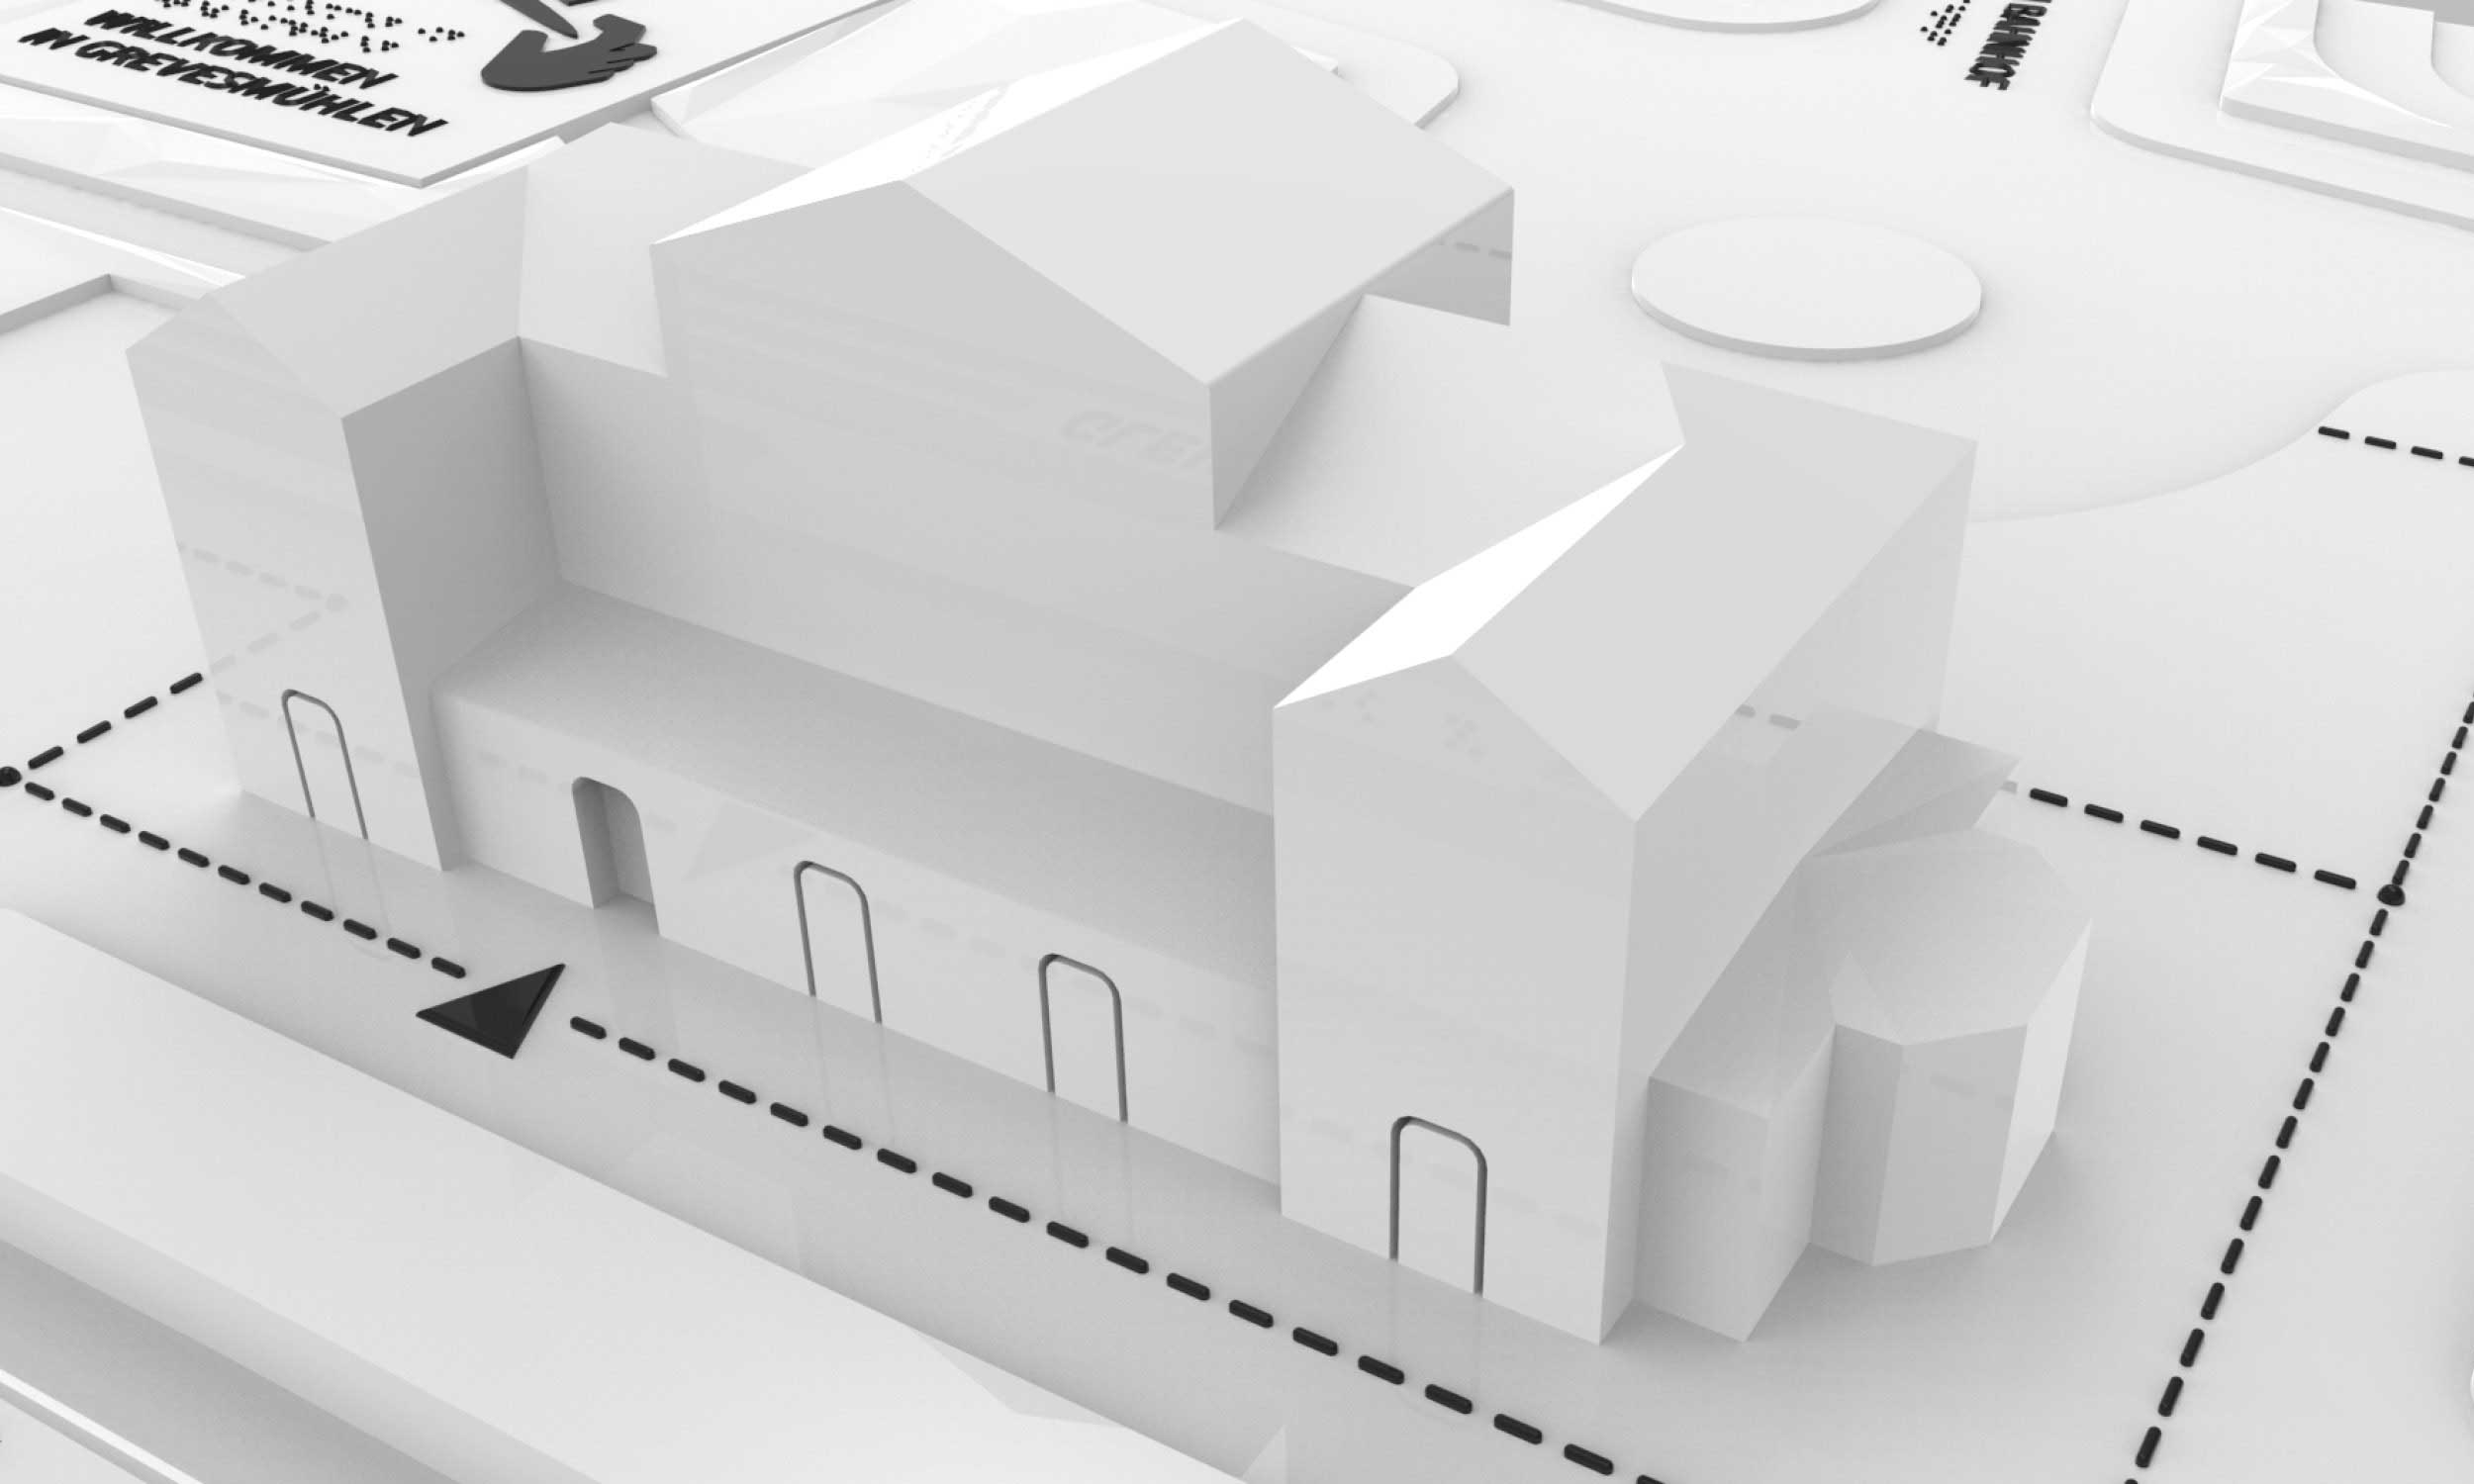 Three-dimensional view of the station building and its surroundings with the help of a computer programme. The building itself and the surroundings have a glossy white surface. The tactile elements, such as dotted lines and inscriptions in Braille and profile writing, are black.